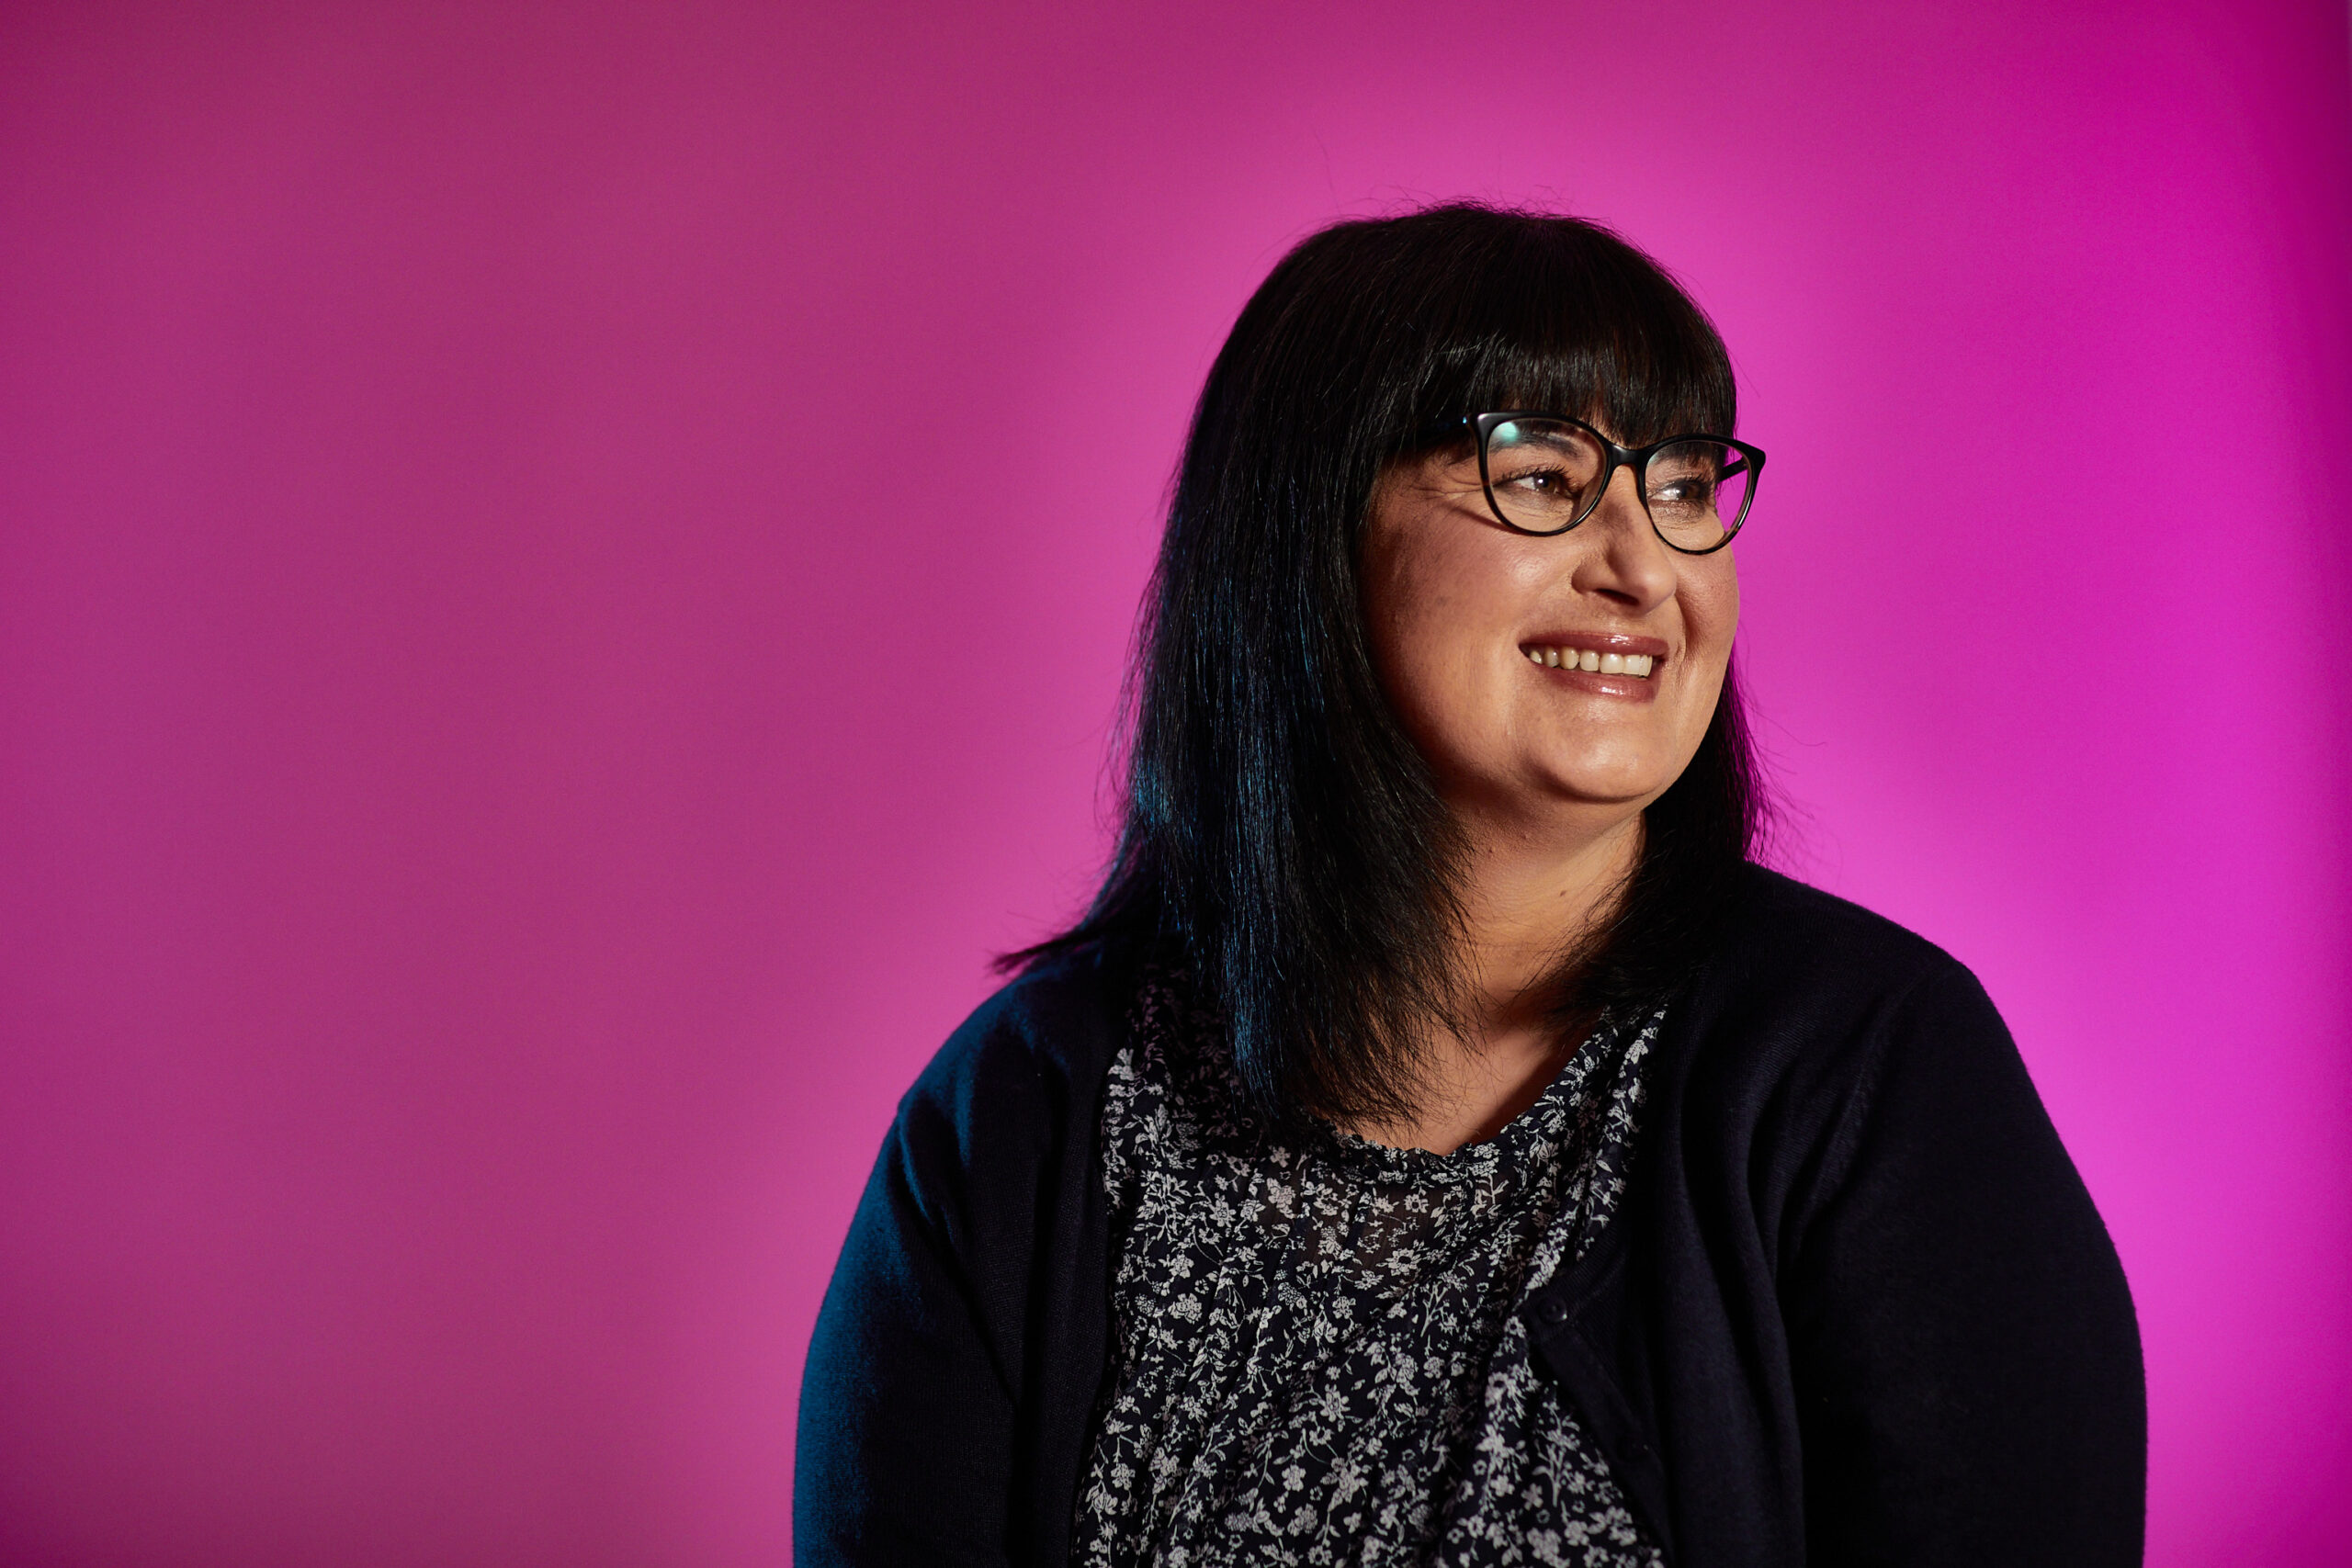 Woman wearing glasses smiling sitting in front of a plum coloured background